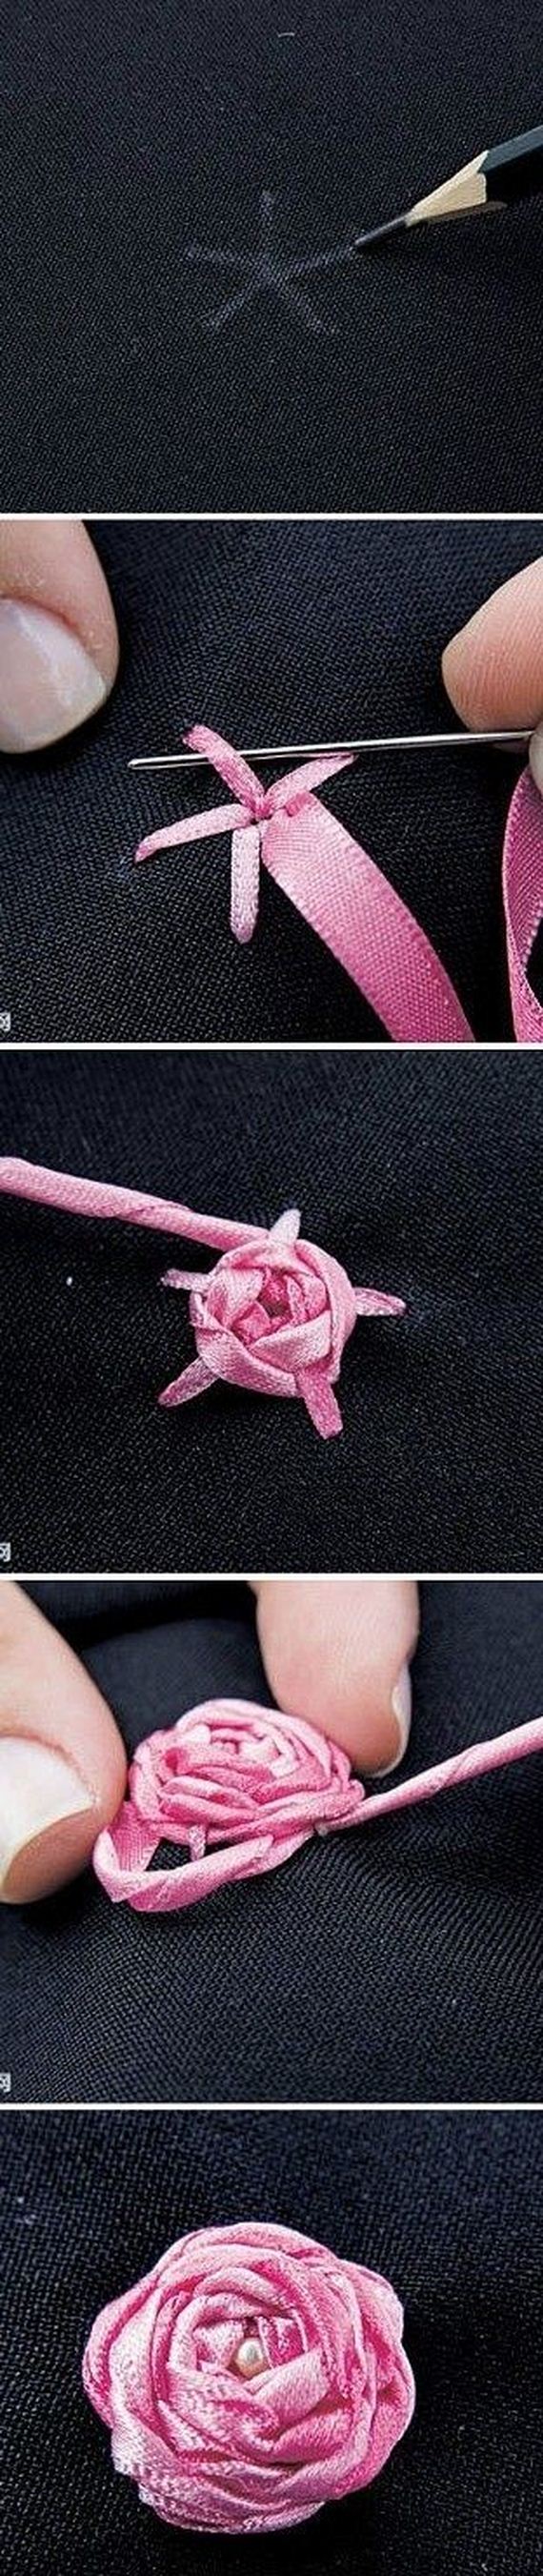 06-Rose-DIY-Projects